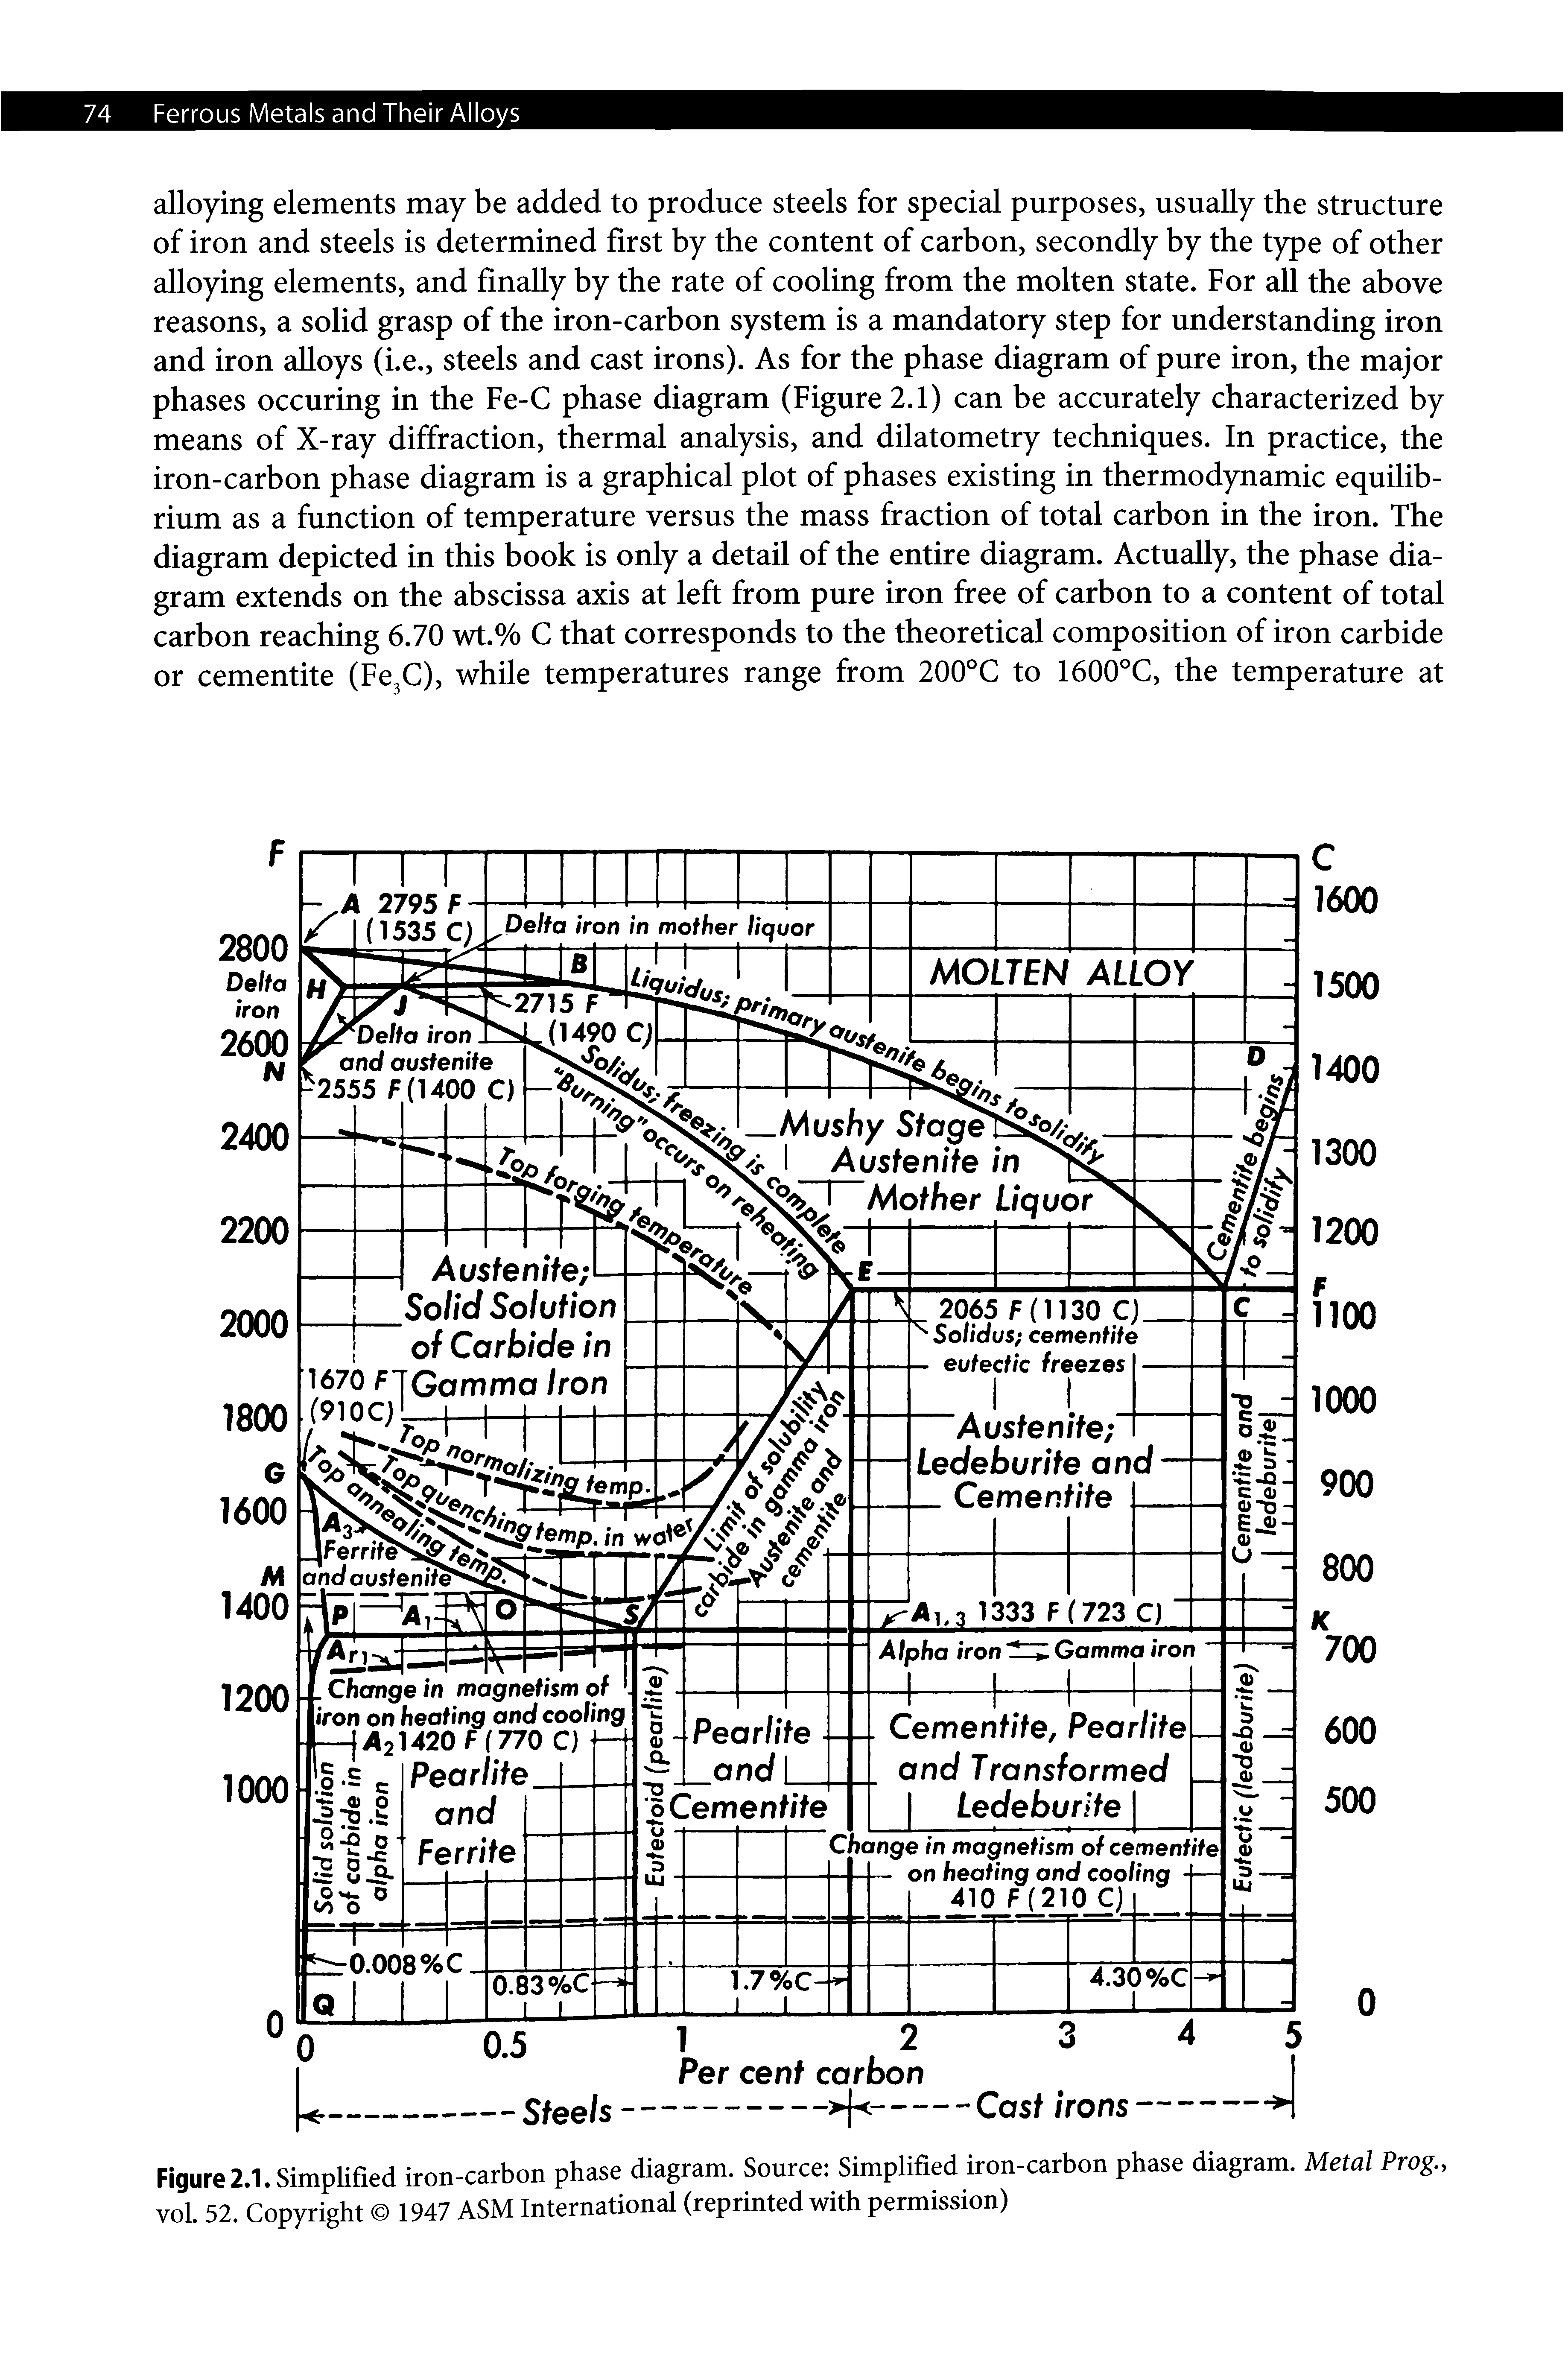 Figure 2.1. Simplified iron-carbon phase diagram. Source Simplified iron-carbon phase diagram. Metal Prog., vol. 52. Copyright 1947 ASM International (reprinted with permission)...